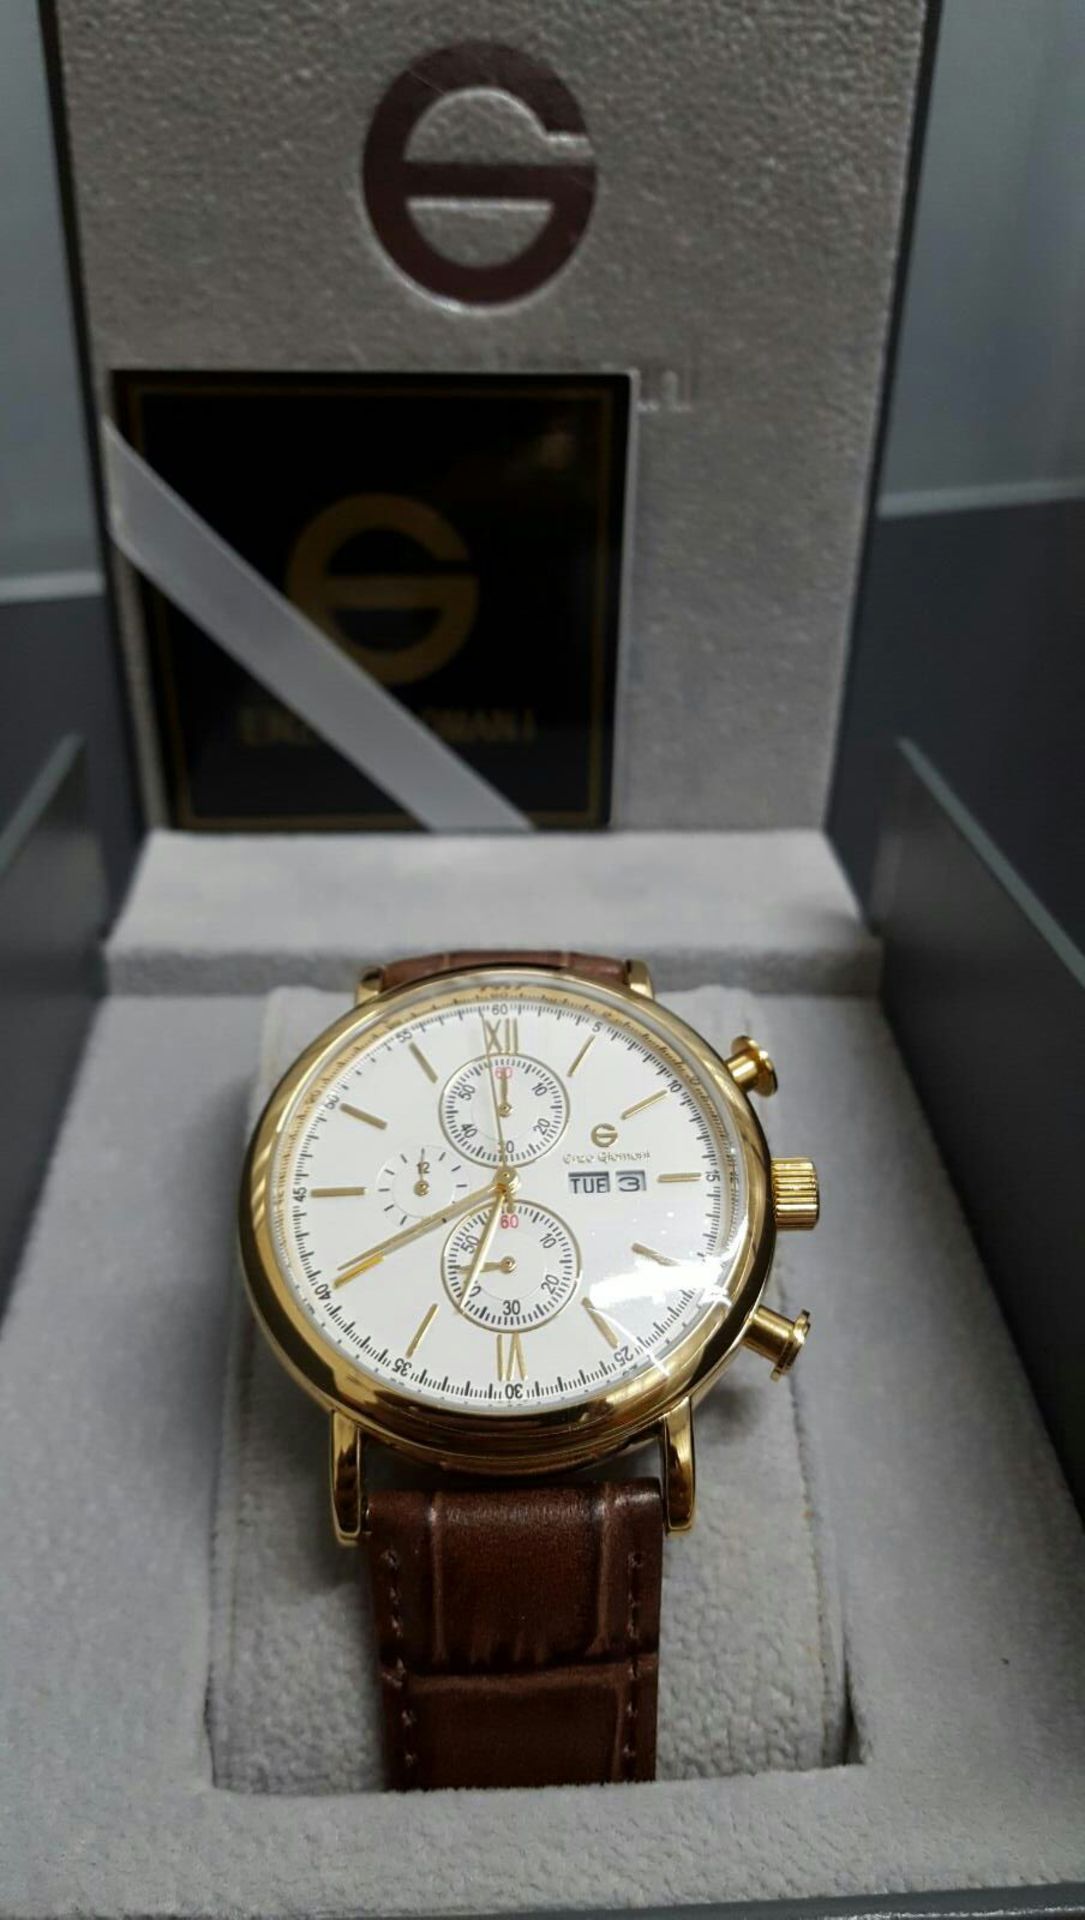 BRAND NEW ENZO GIOMANI EG0024, GENTS GOLD TONE WITH WHITE FACE, BROWN LEATHER STRAP CHRONOGRAPH - Image 2 of 2